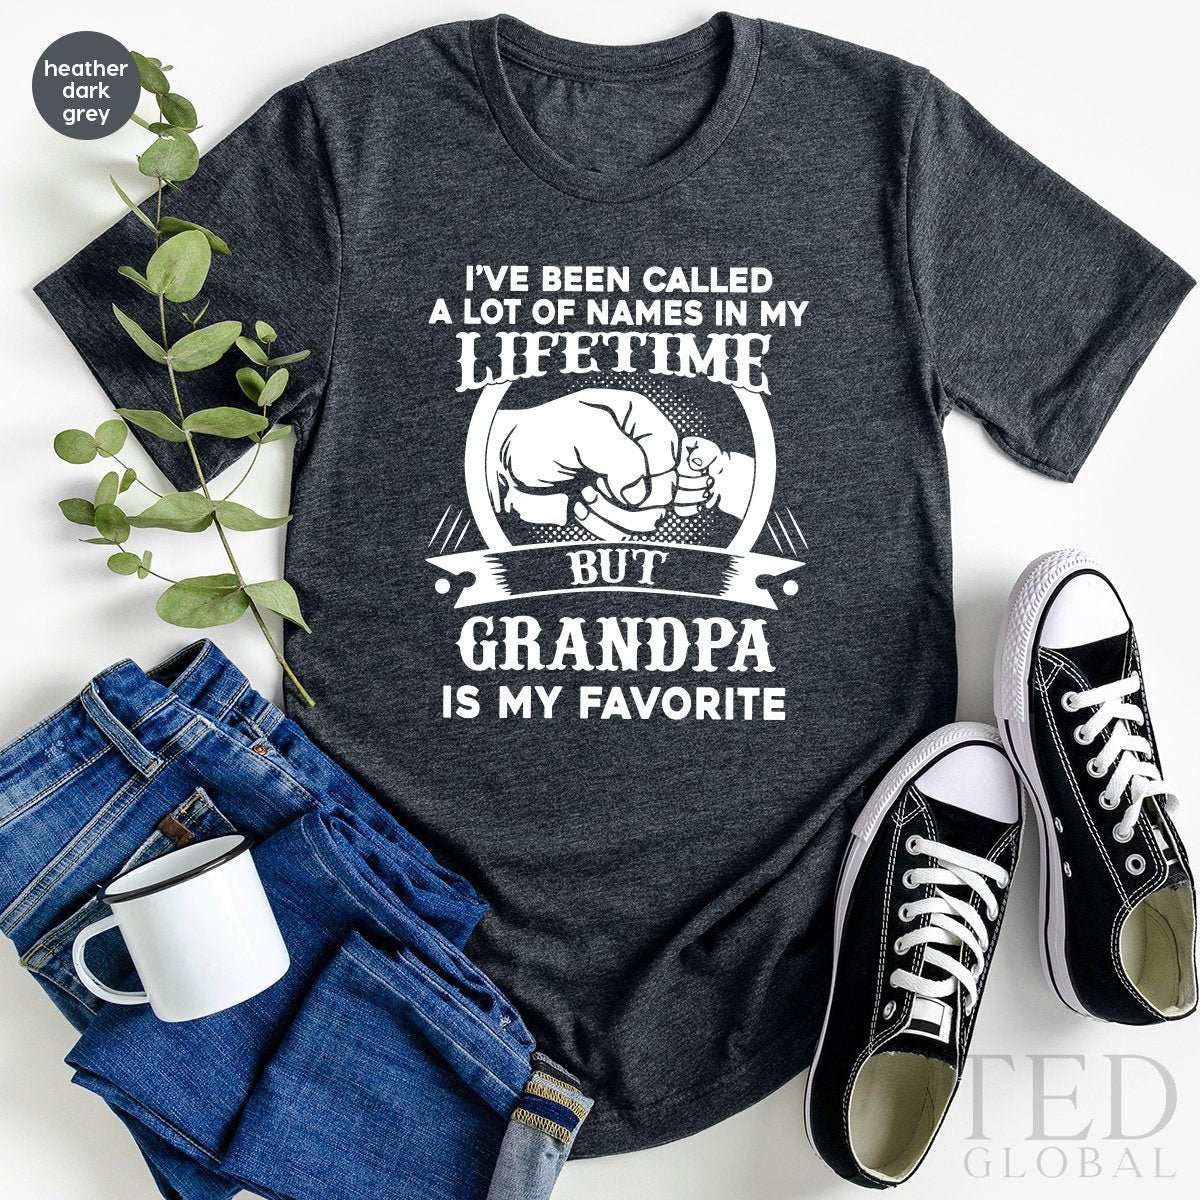 Best Papaw T-Shirt,Awesome Grumpy Gift,I've Been Called A Lot Of Names In My Life Time Grandpa Is My Favorite TShirt,Grampa Birthday Tee - Fastdeliverytees.com